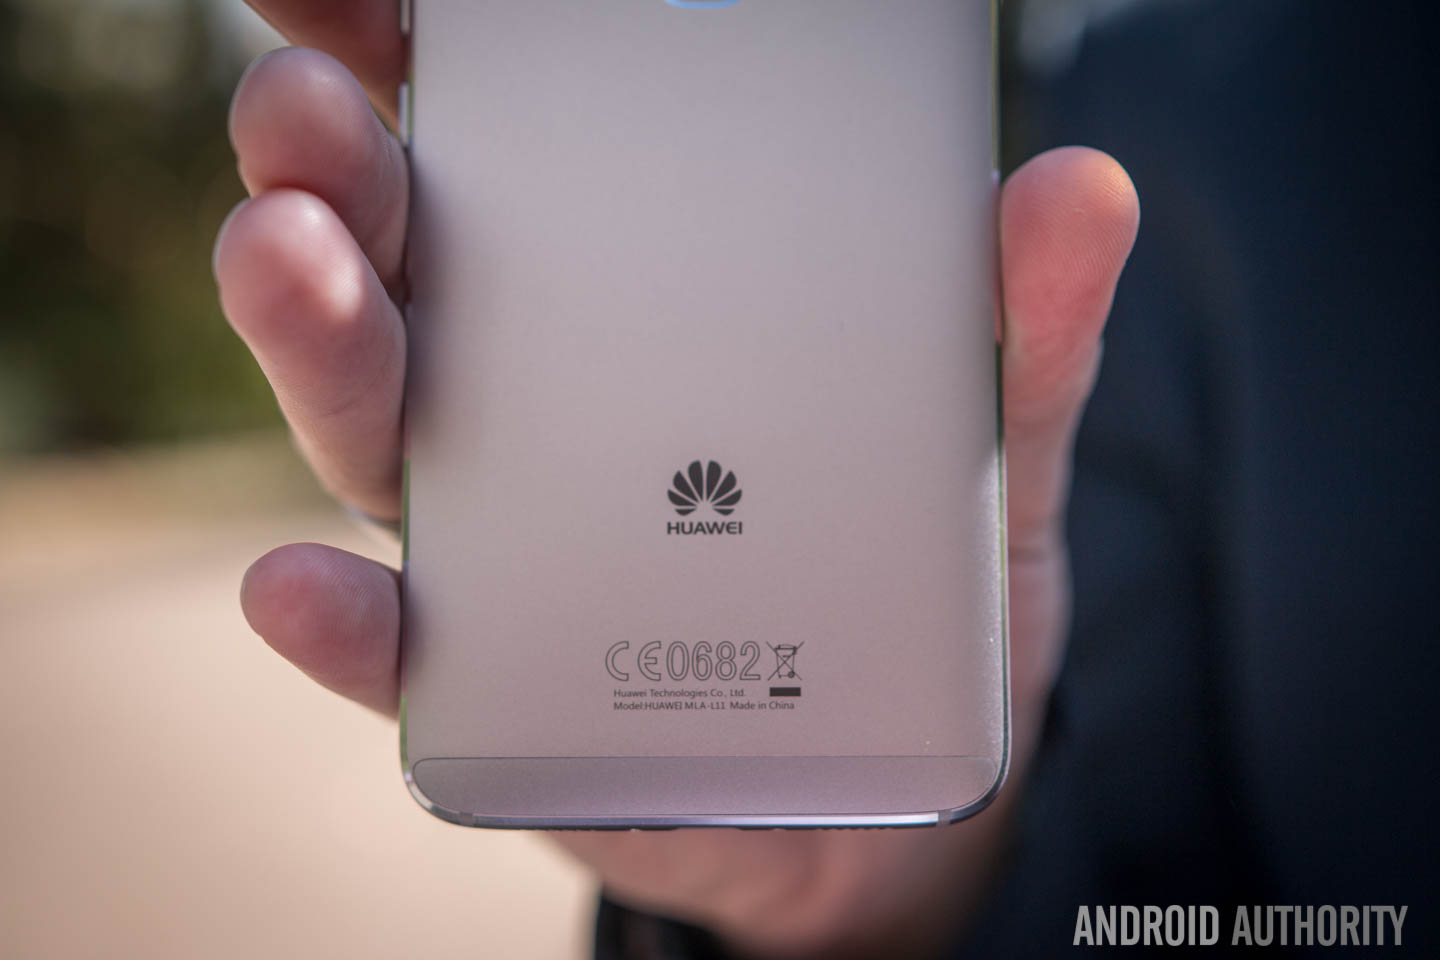 HUAWEI allegedly Google's pick for Pixel, not HTC - Authority